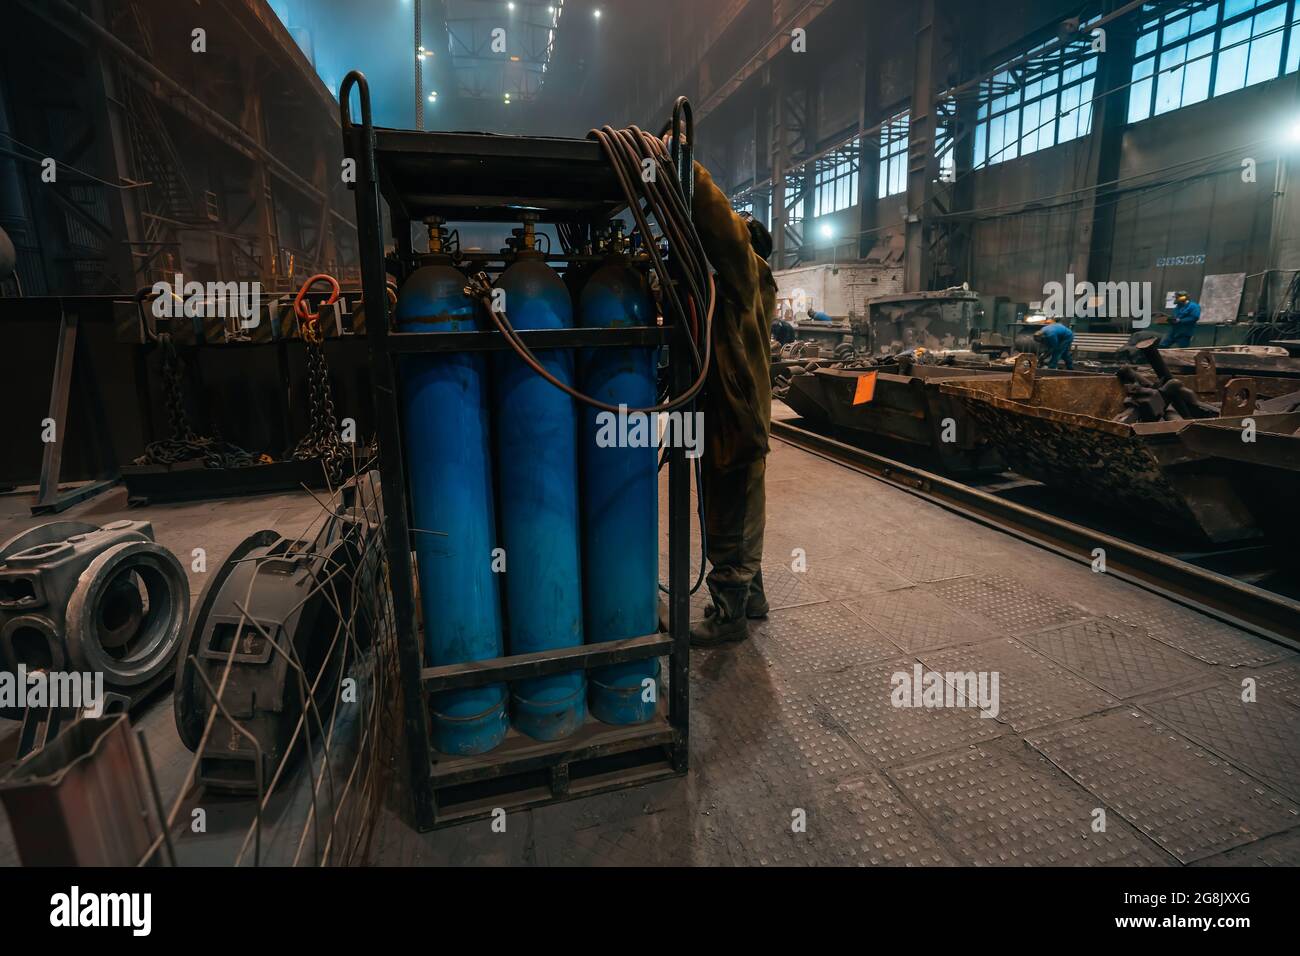 Balloons with gas or oxygen in heavy Industry manufacturing factory workshop. Metallurgy manufacturing. Stock Photo